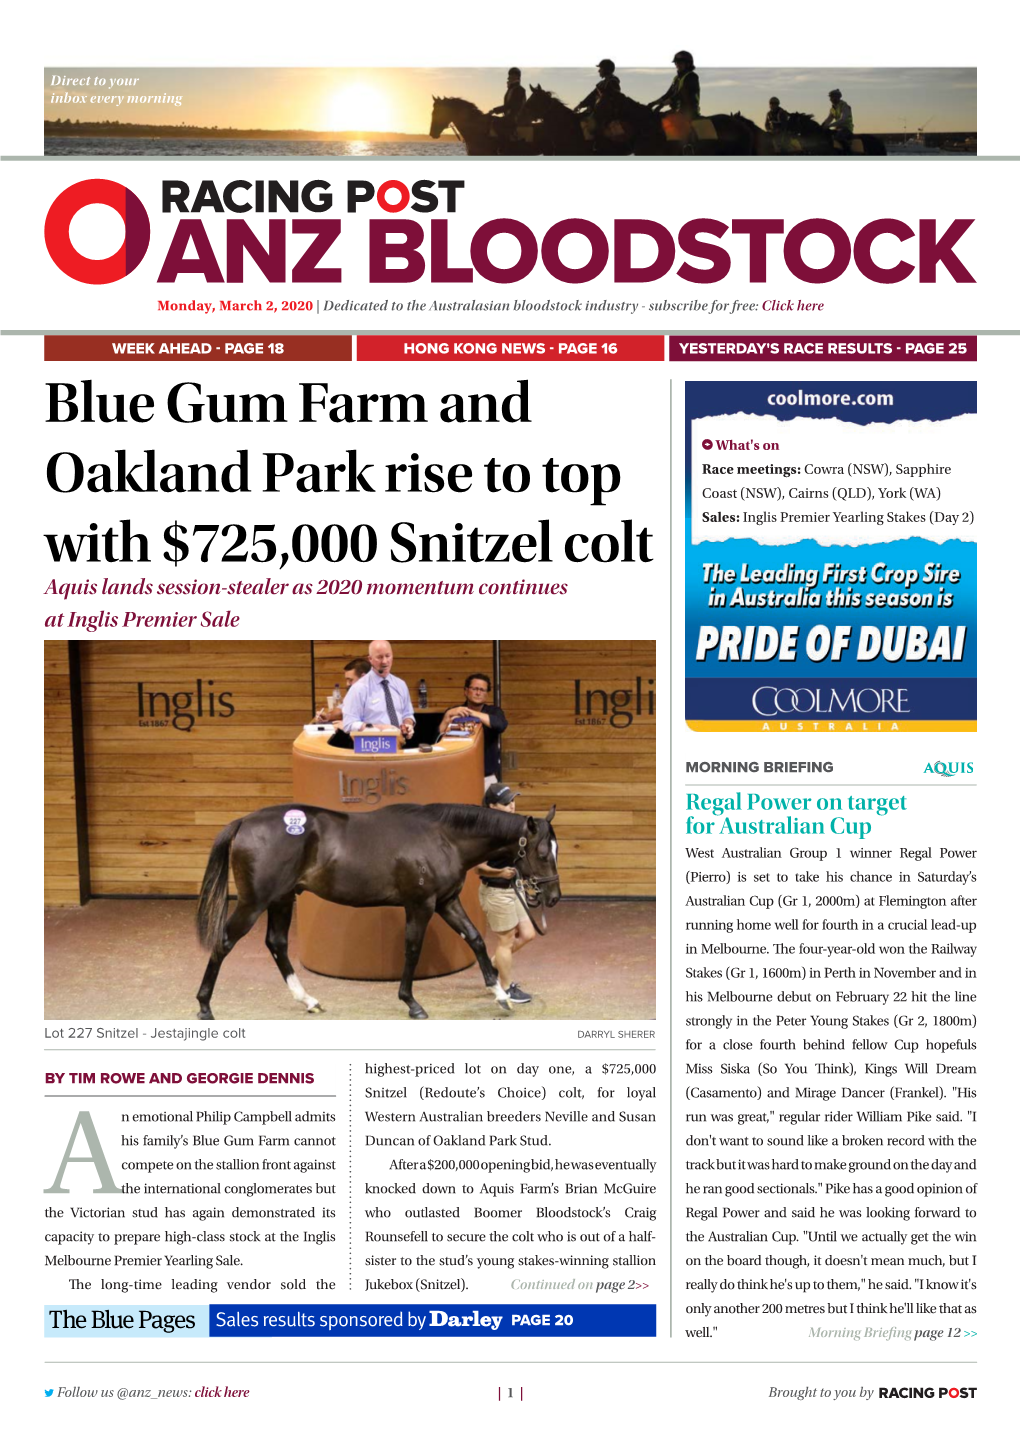 Blue Gum Farm and Oakland Park Rise to Top with $725,000 Snitzel Colt | 2 | Monday, March 2, 2020